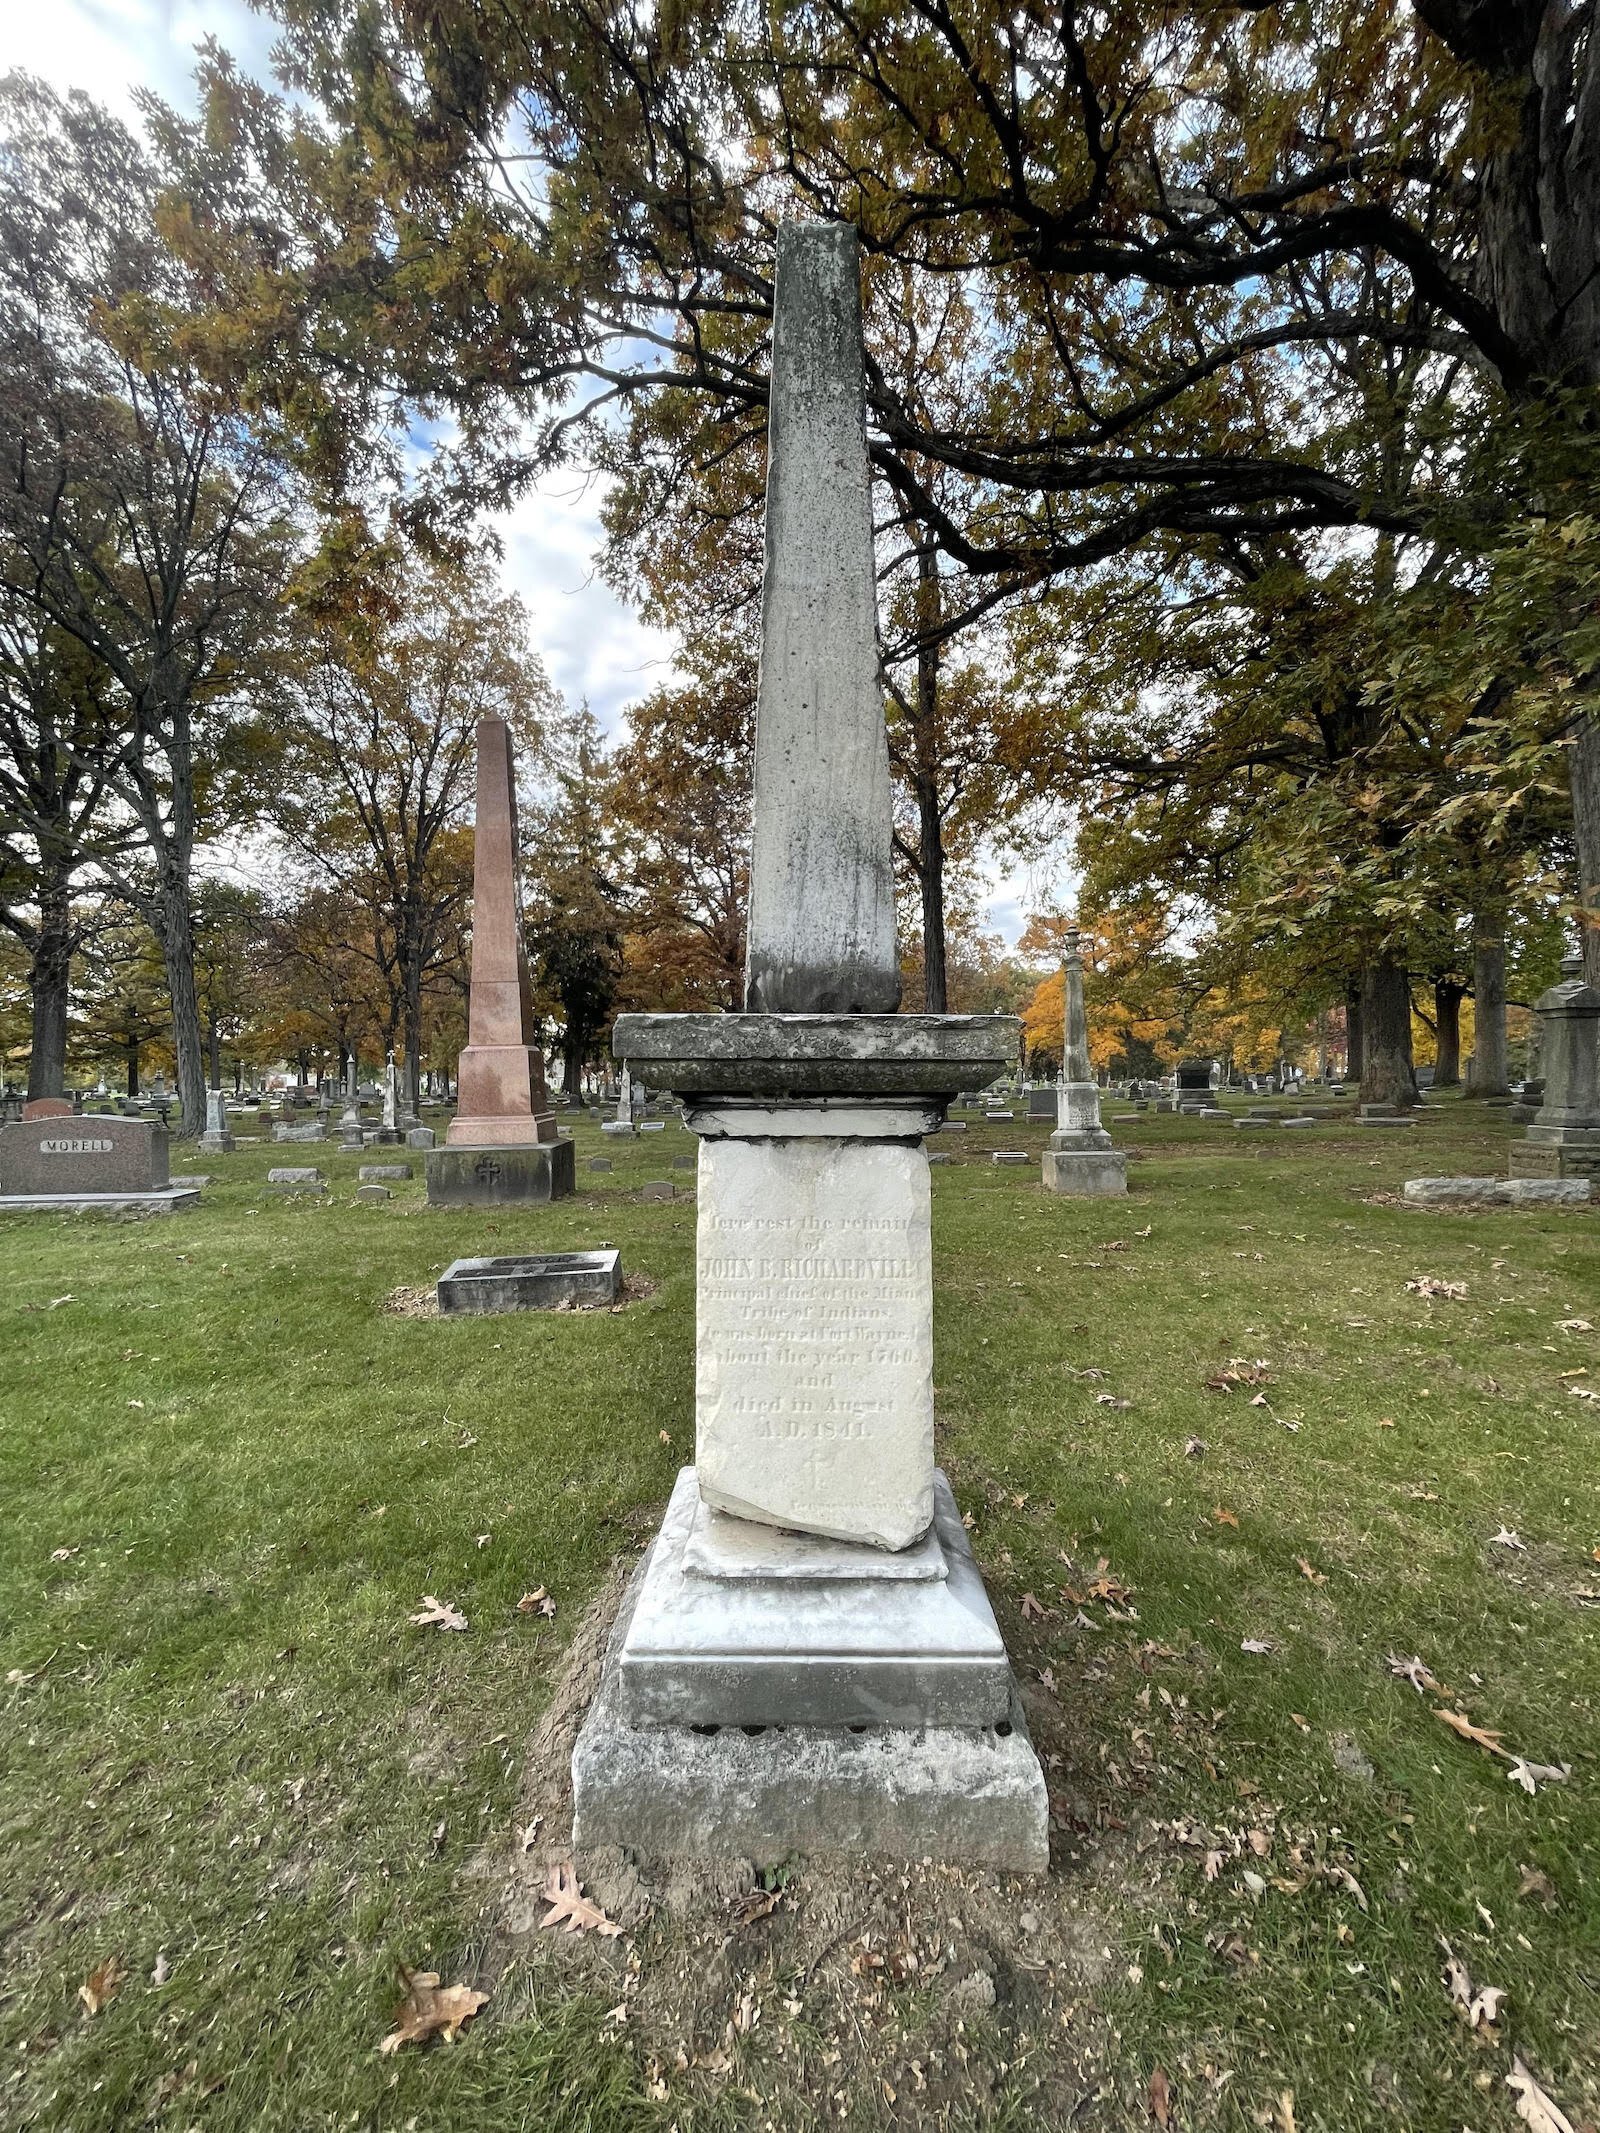 A memorial remembering Chief Richardville stands in the Catholic cemetery on Lake Avenue. However, there is debate about whether his body was moved when the cemetery was built.